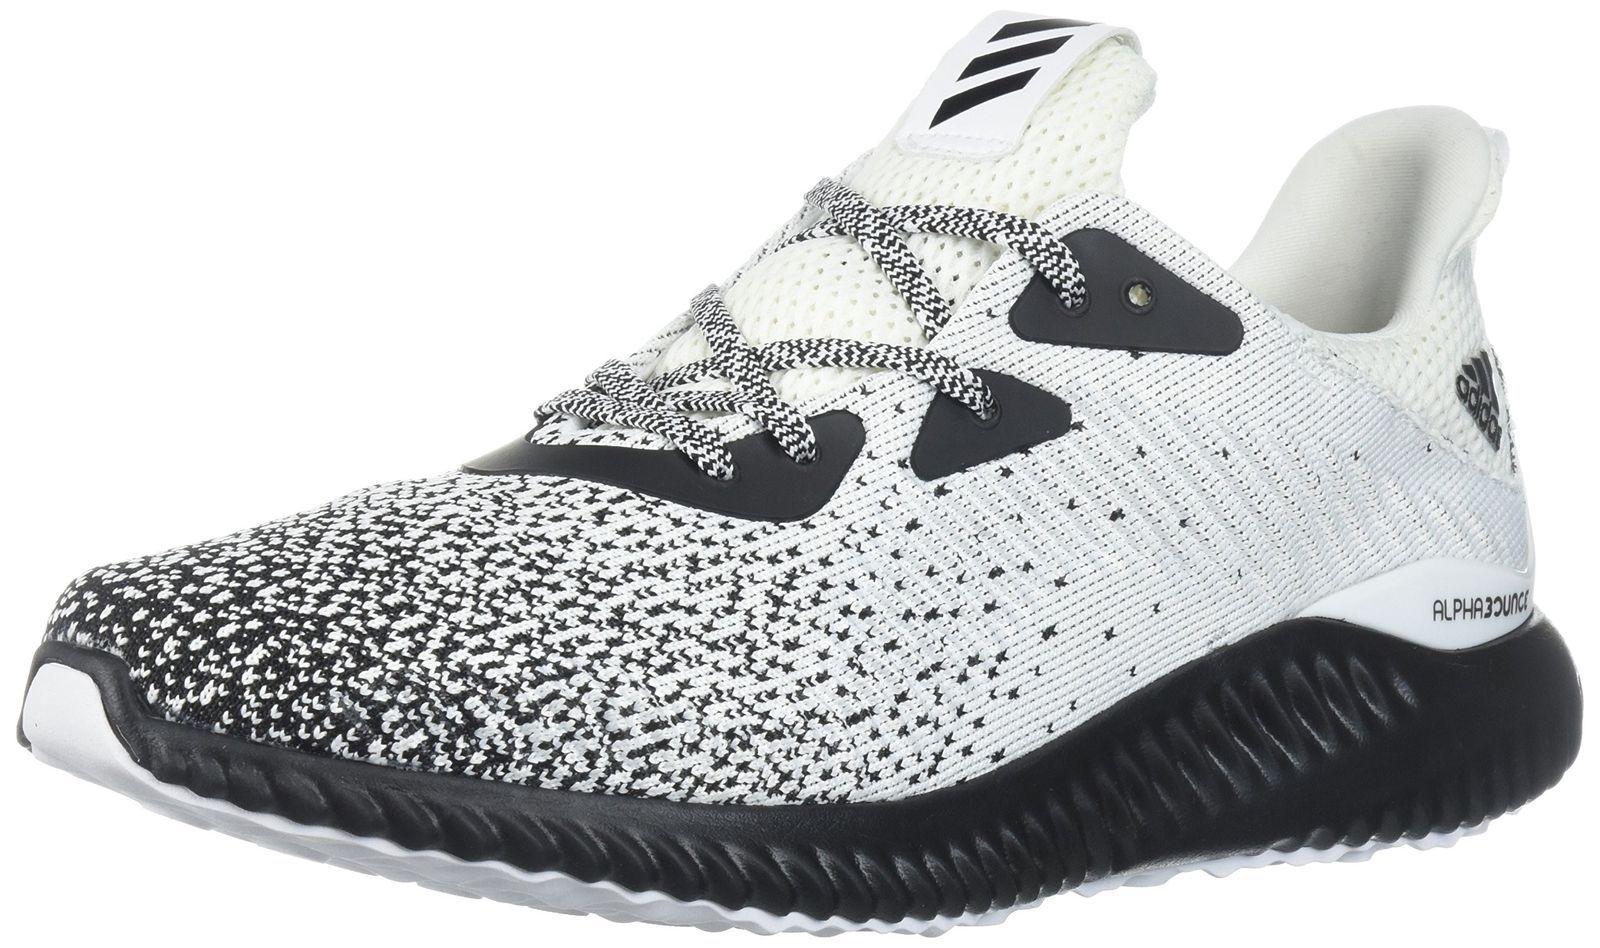 Black and White Athletic Clothing Logo - adidas Alphabounce Ck Mens Cq0406 Black White Forgedmesh Running